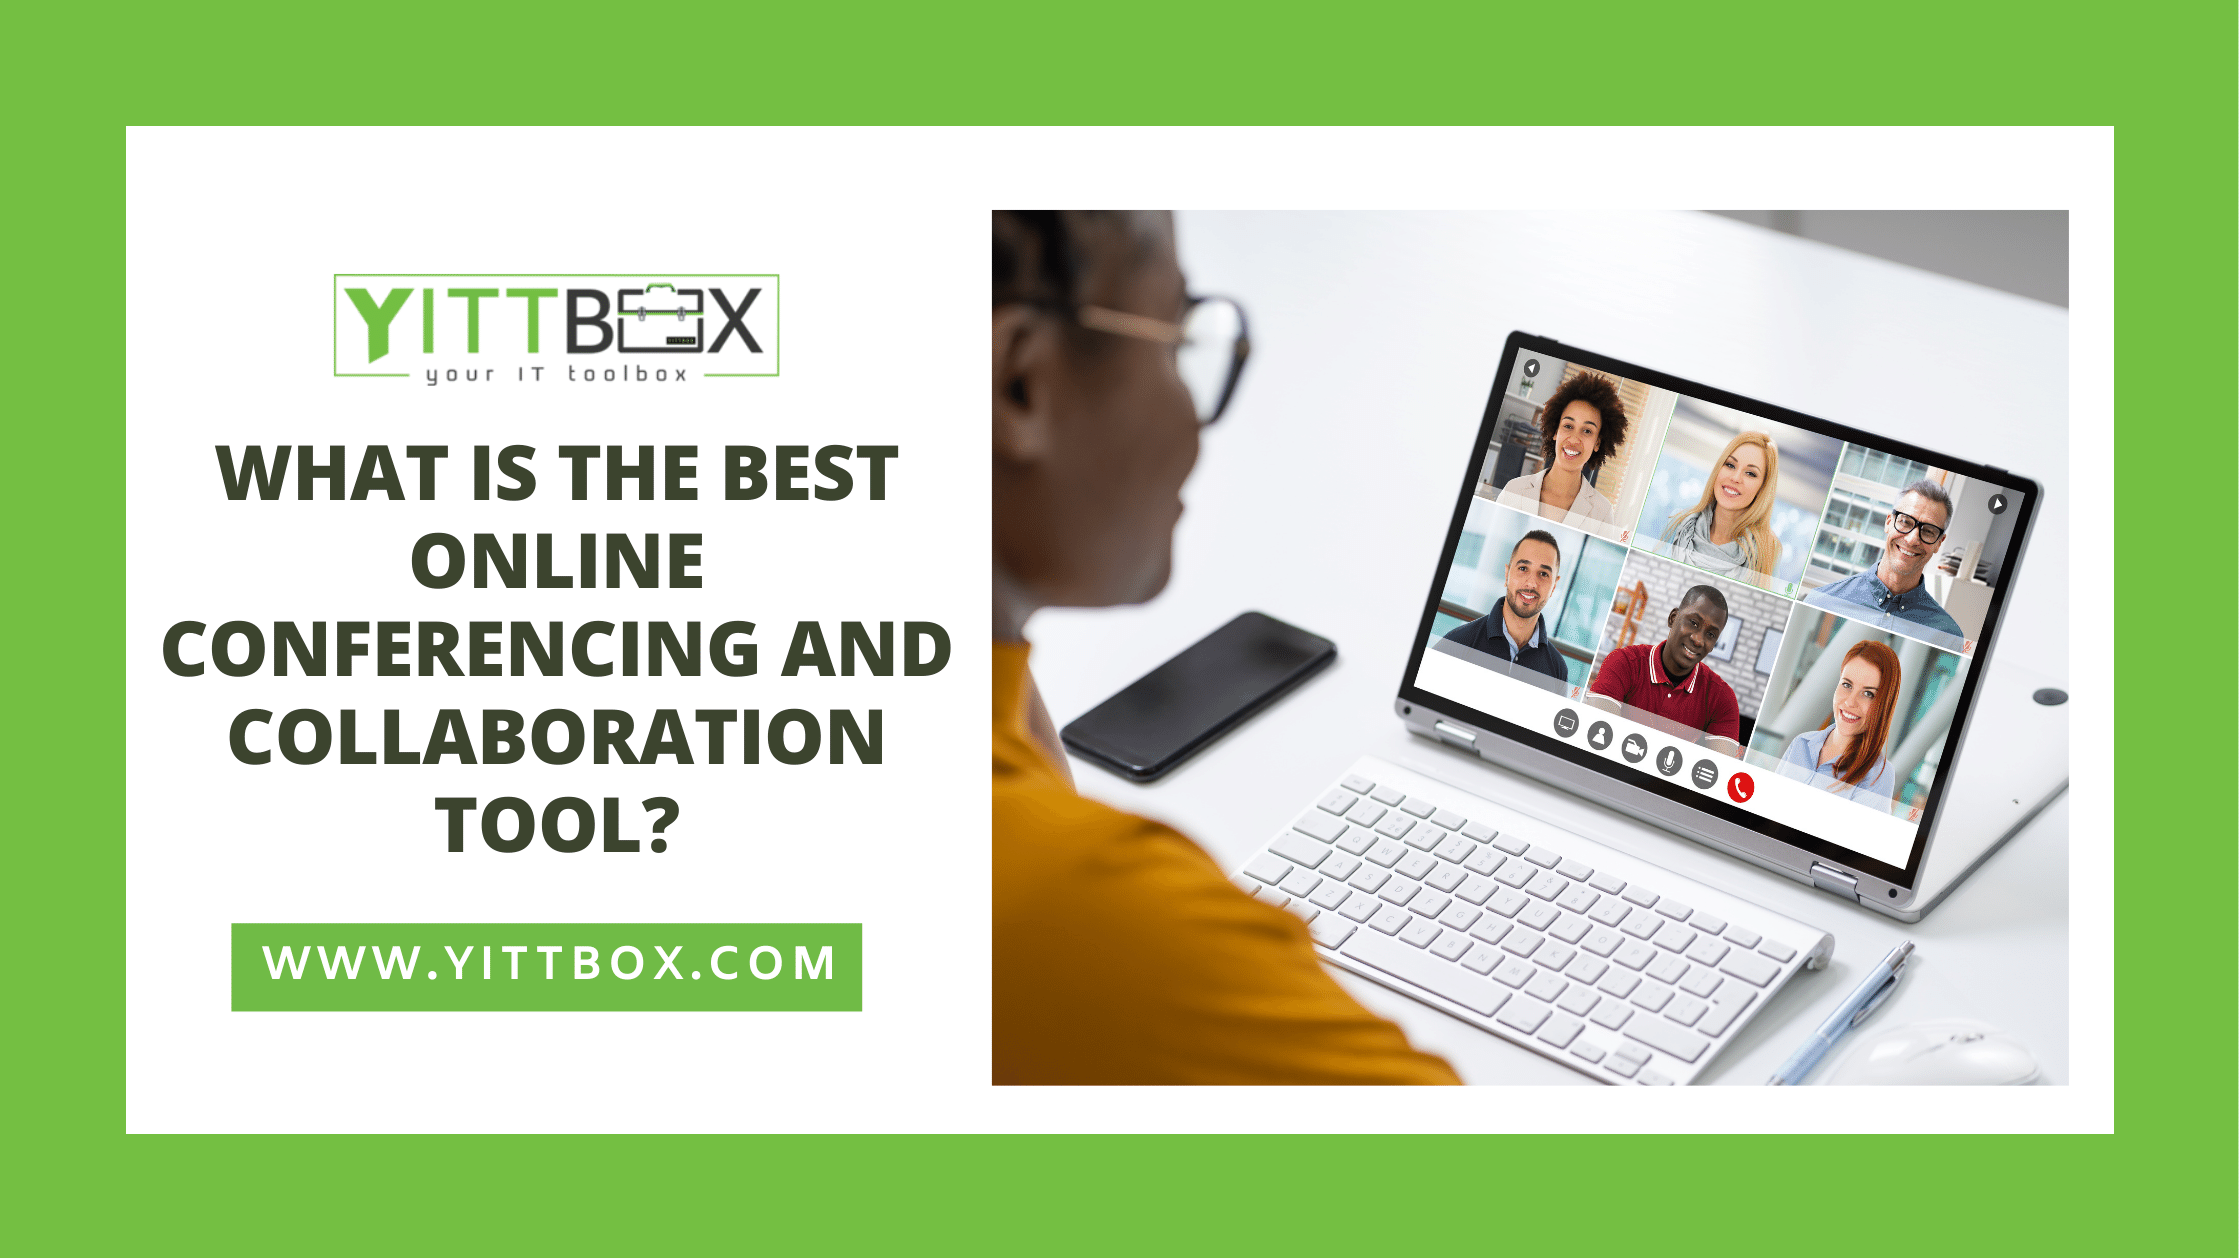 What is the best online conferencing and collaboration tool?